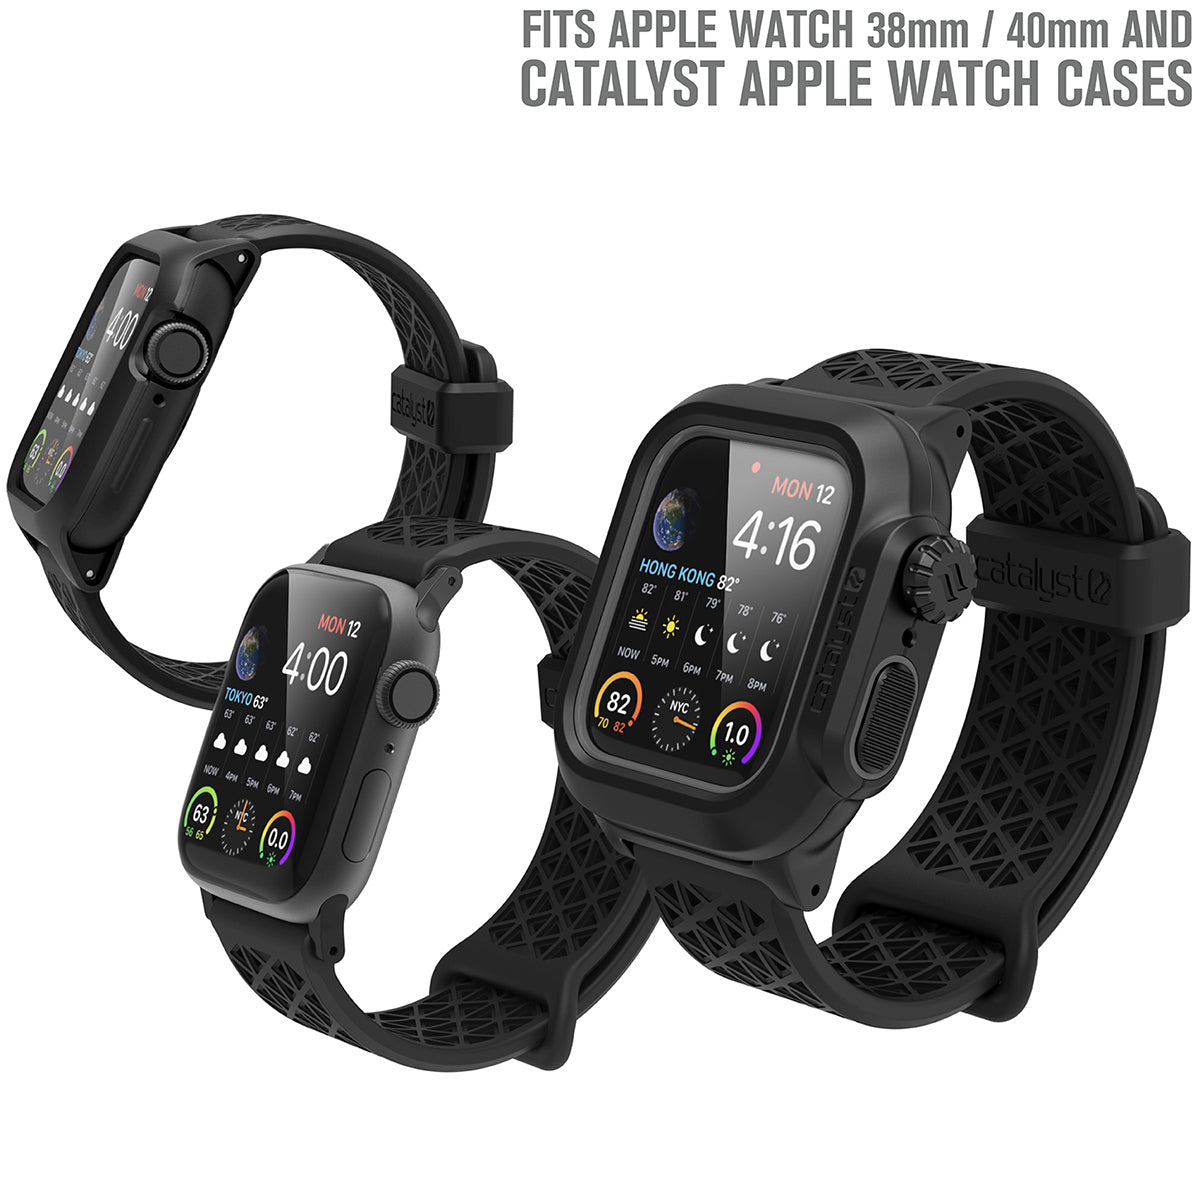 catalyst apple watch series 9 8 7 6 5 4 se gen 2 1 38 40 41mm sports band with apple connector three apple watches with impact and waterproof case with sports band black text reads fits apple watch 38mm 40mm and catalyst apple watch cases